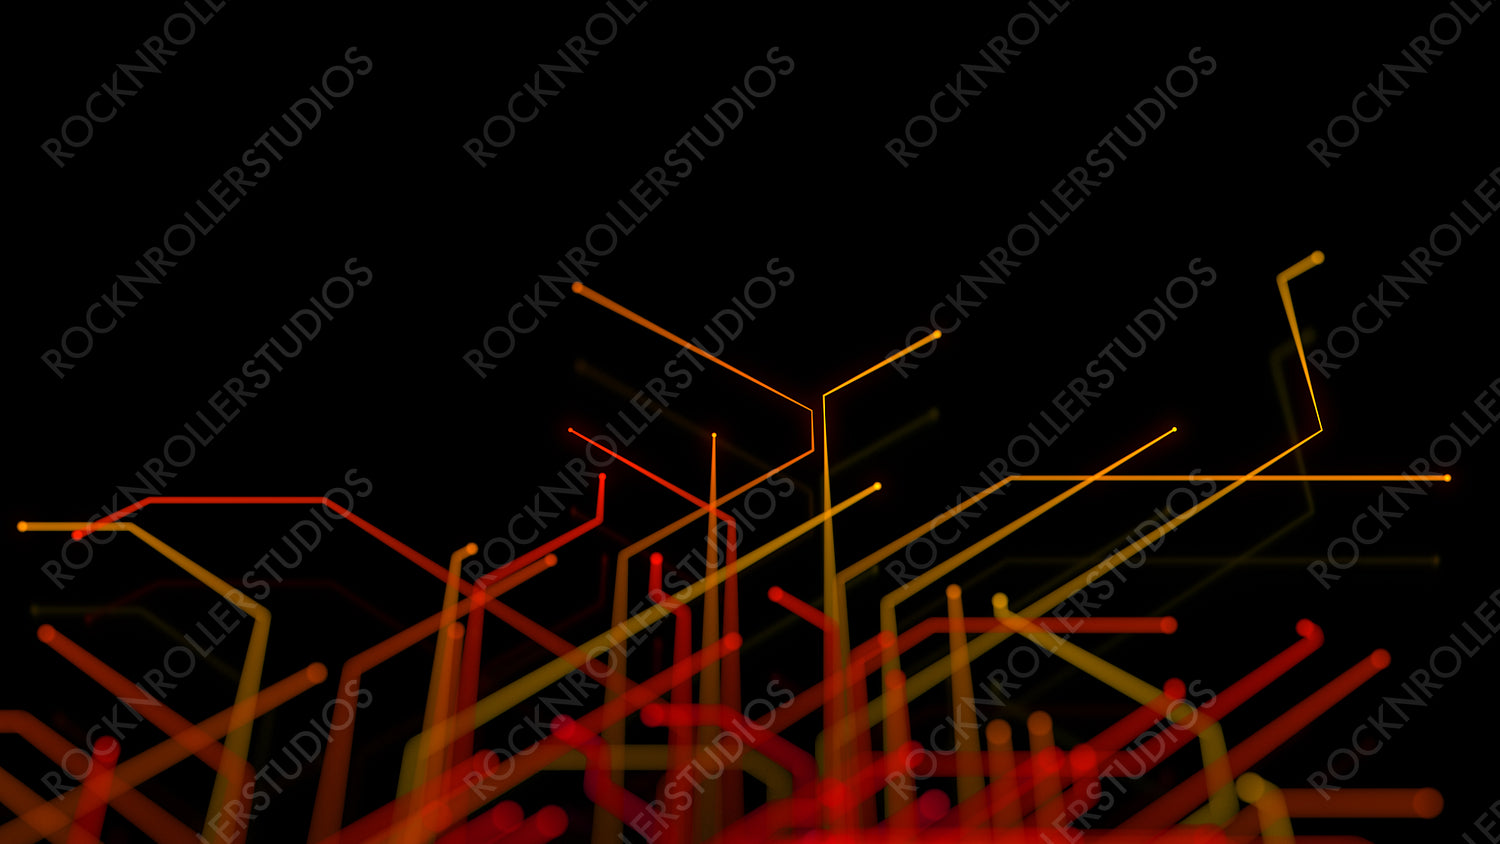 Orange and Yellow Cyberspace Concept with Technical Grid. Futuristic Neon Lines with copy-space.